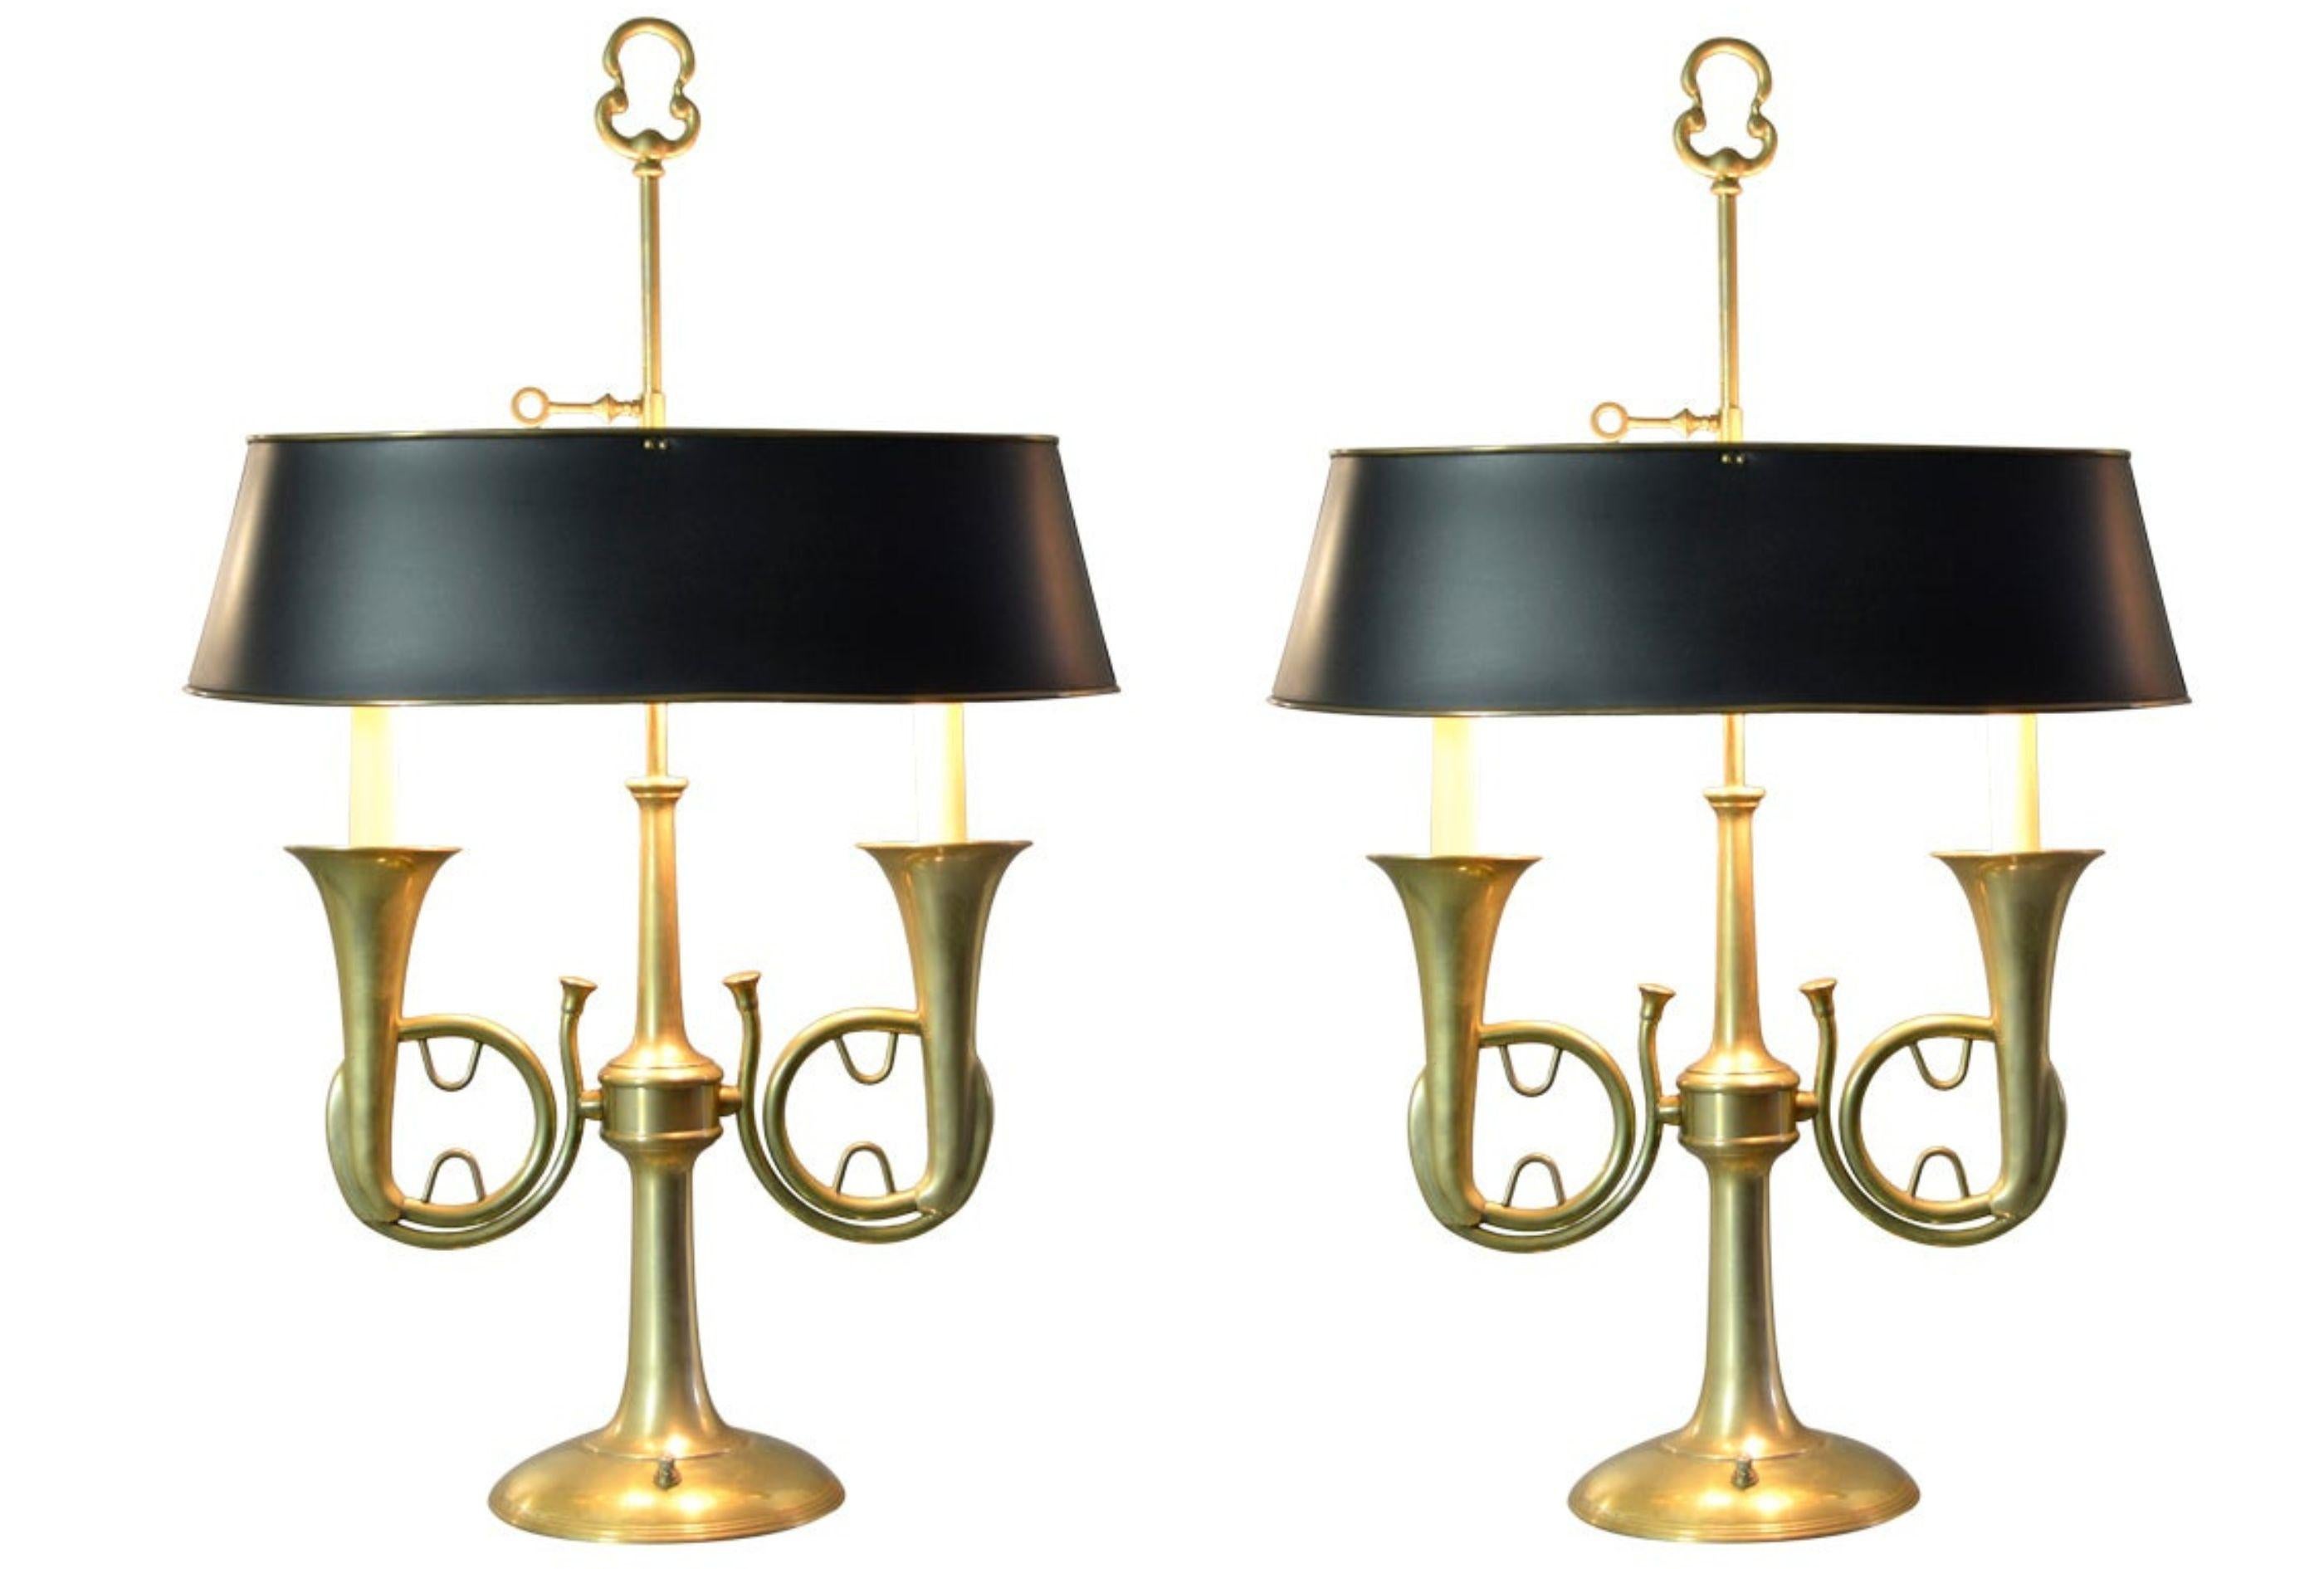 North American Chapman French Horn Brass Table Lamps, circa 1960s For Sale